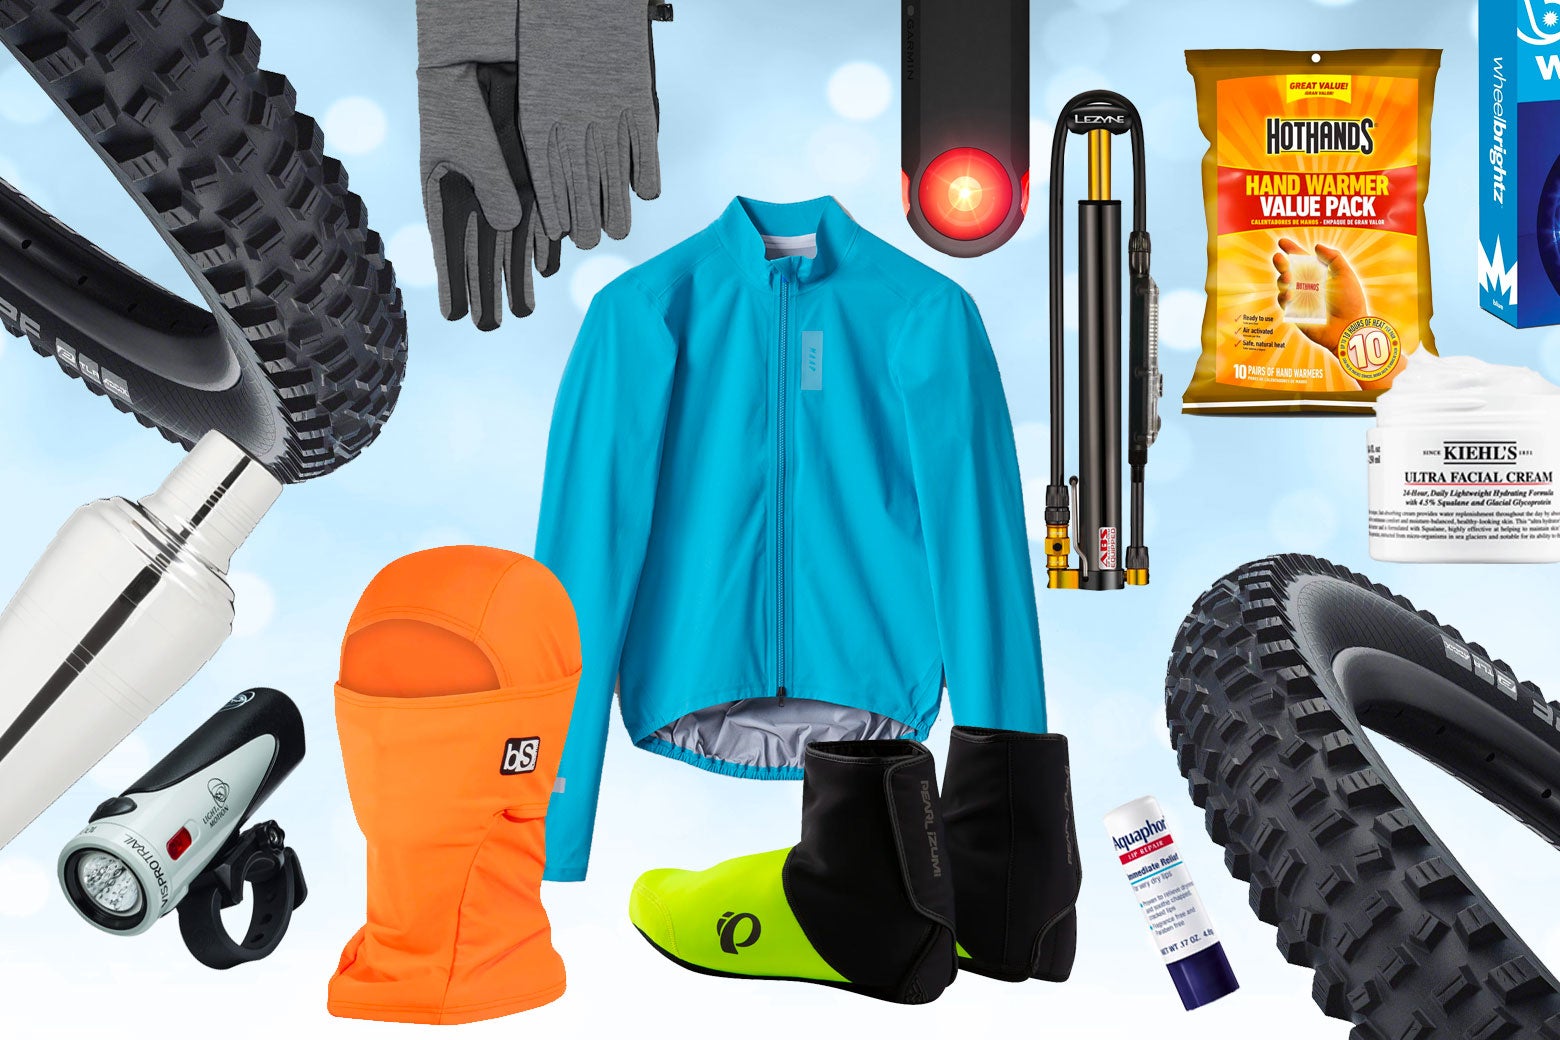 Whoa There, Chief! Watch Where You’re Driving! This Gift Guide Is for Bikes! Slate Staff